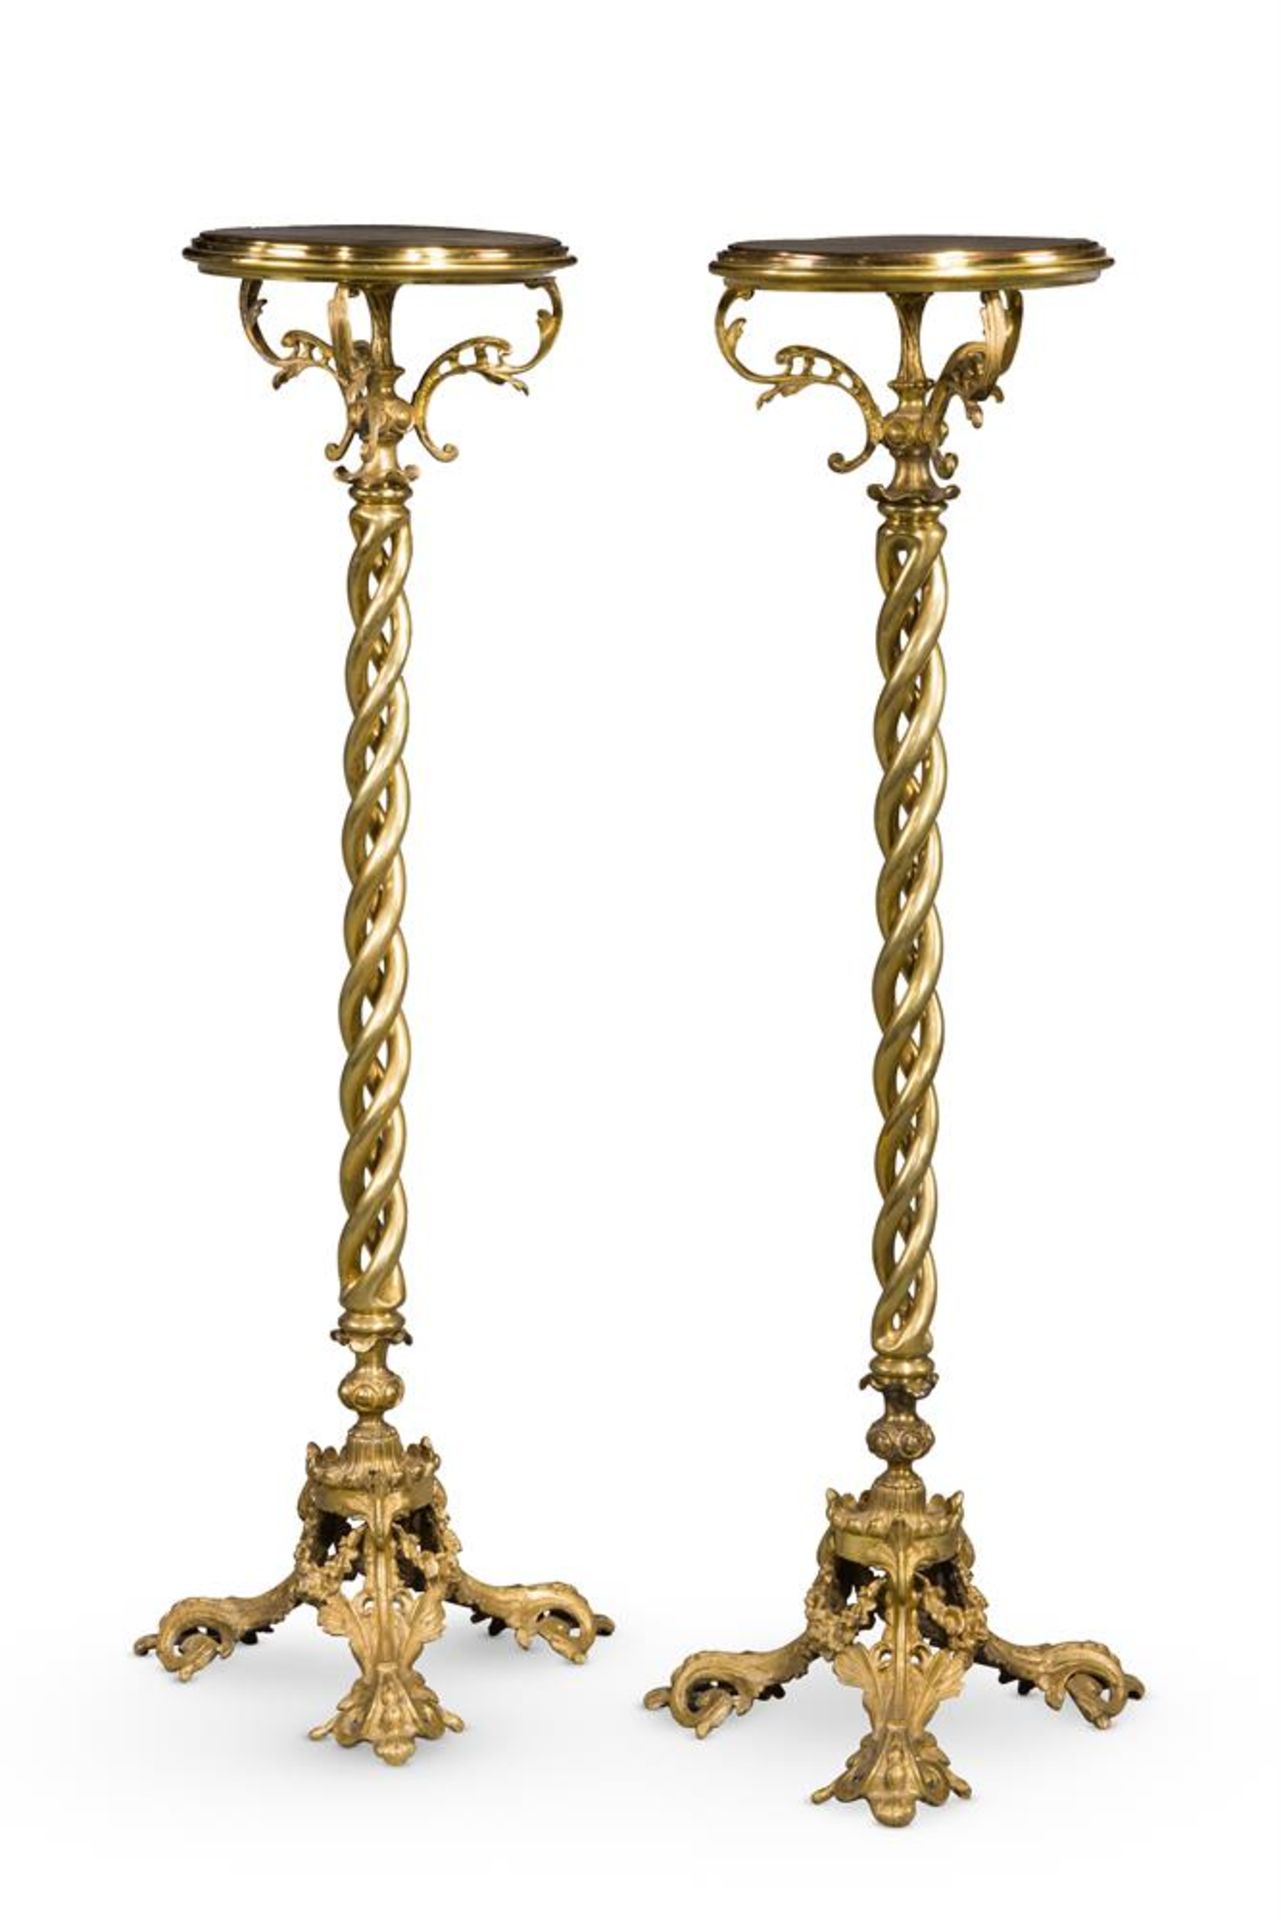 A PAIR OF GILT METAL AND BRASS TORCHERES, LATE 19TH CENTURY